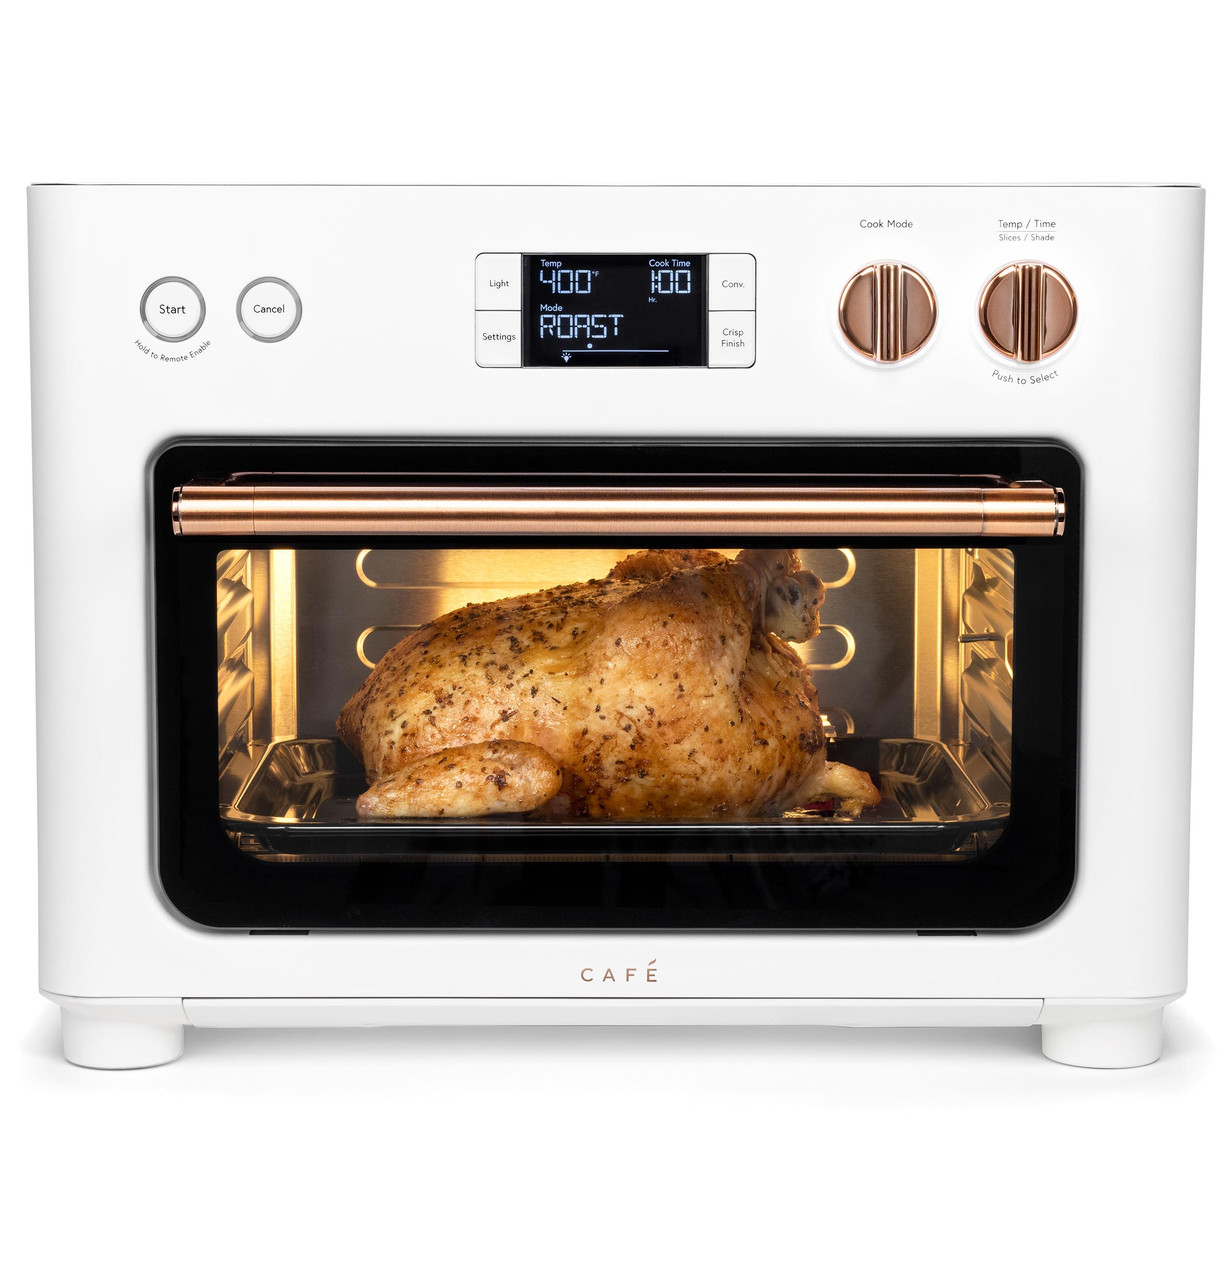  Instant Pot Omni Plus 11-in-1 Toaster Oven - Air Fry,  Dehydrate, Toast, Roast, Bake, Broil, Slow Cook, Proof or Reheat :  Everything Else